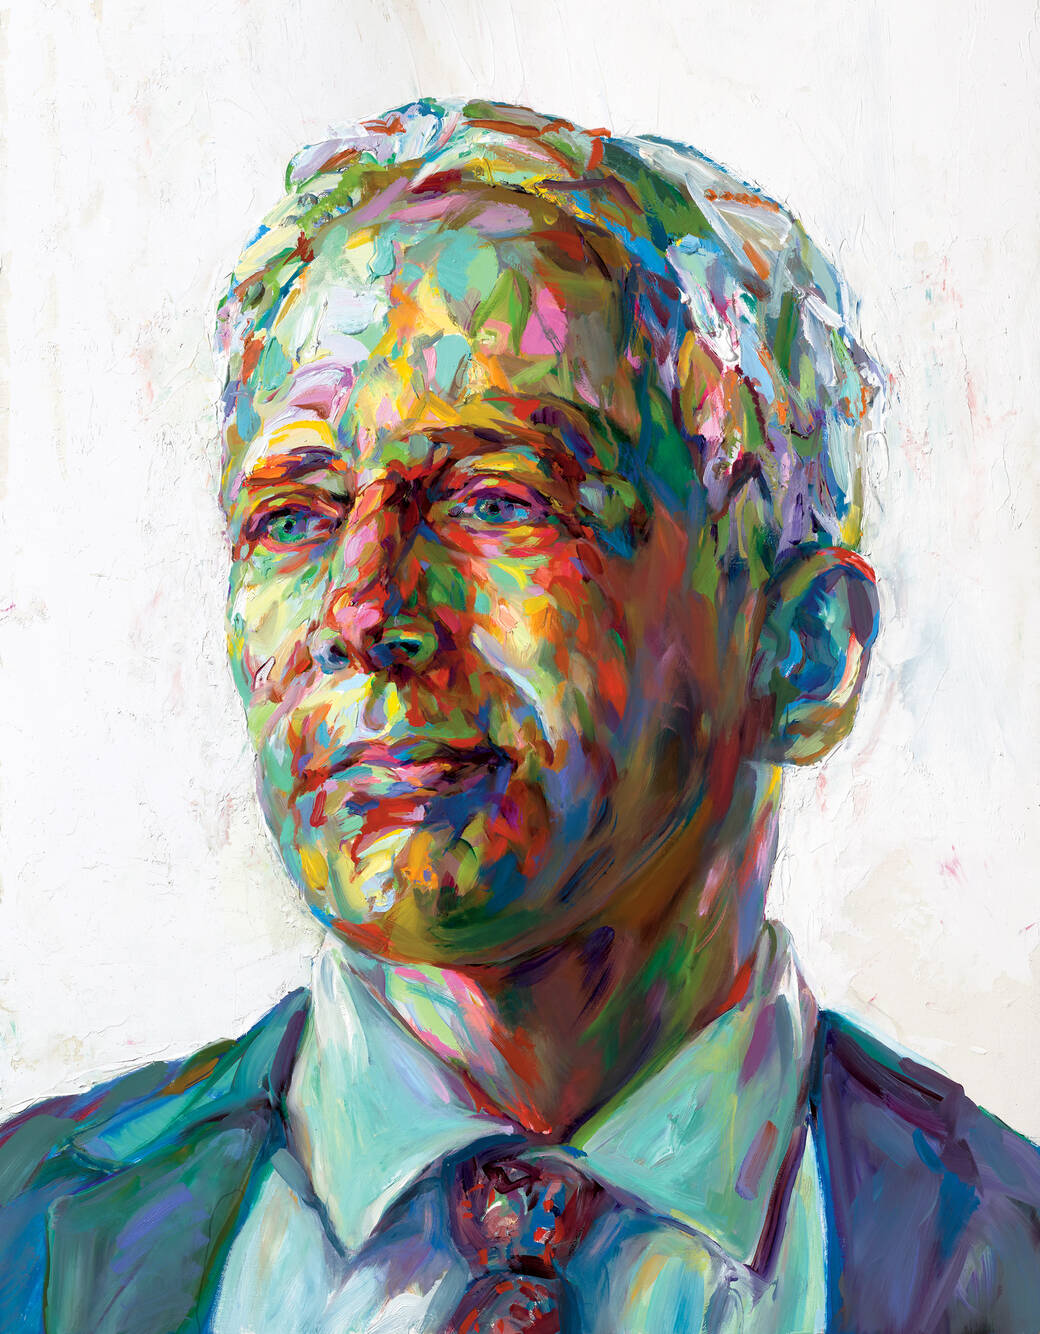 Portrait by Aaron Smith of ArtCenter President Lorne M. Buchman, commissioned for the cover of Dot magazine’s Spring 2022 print issue.